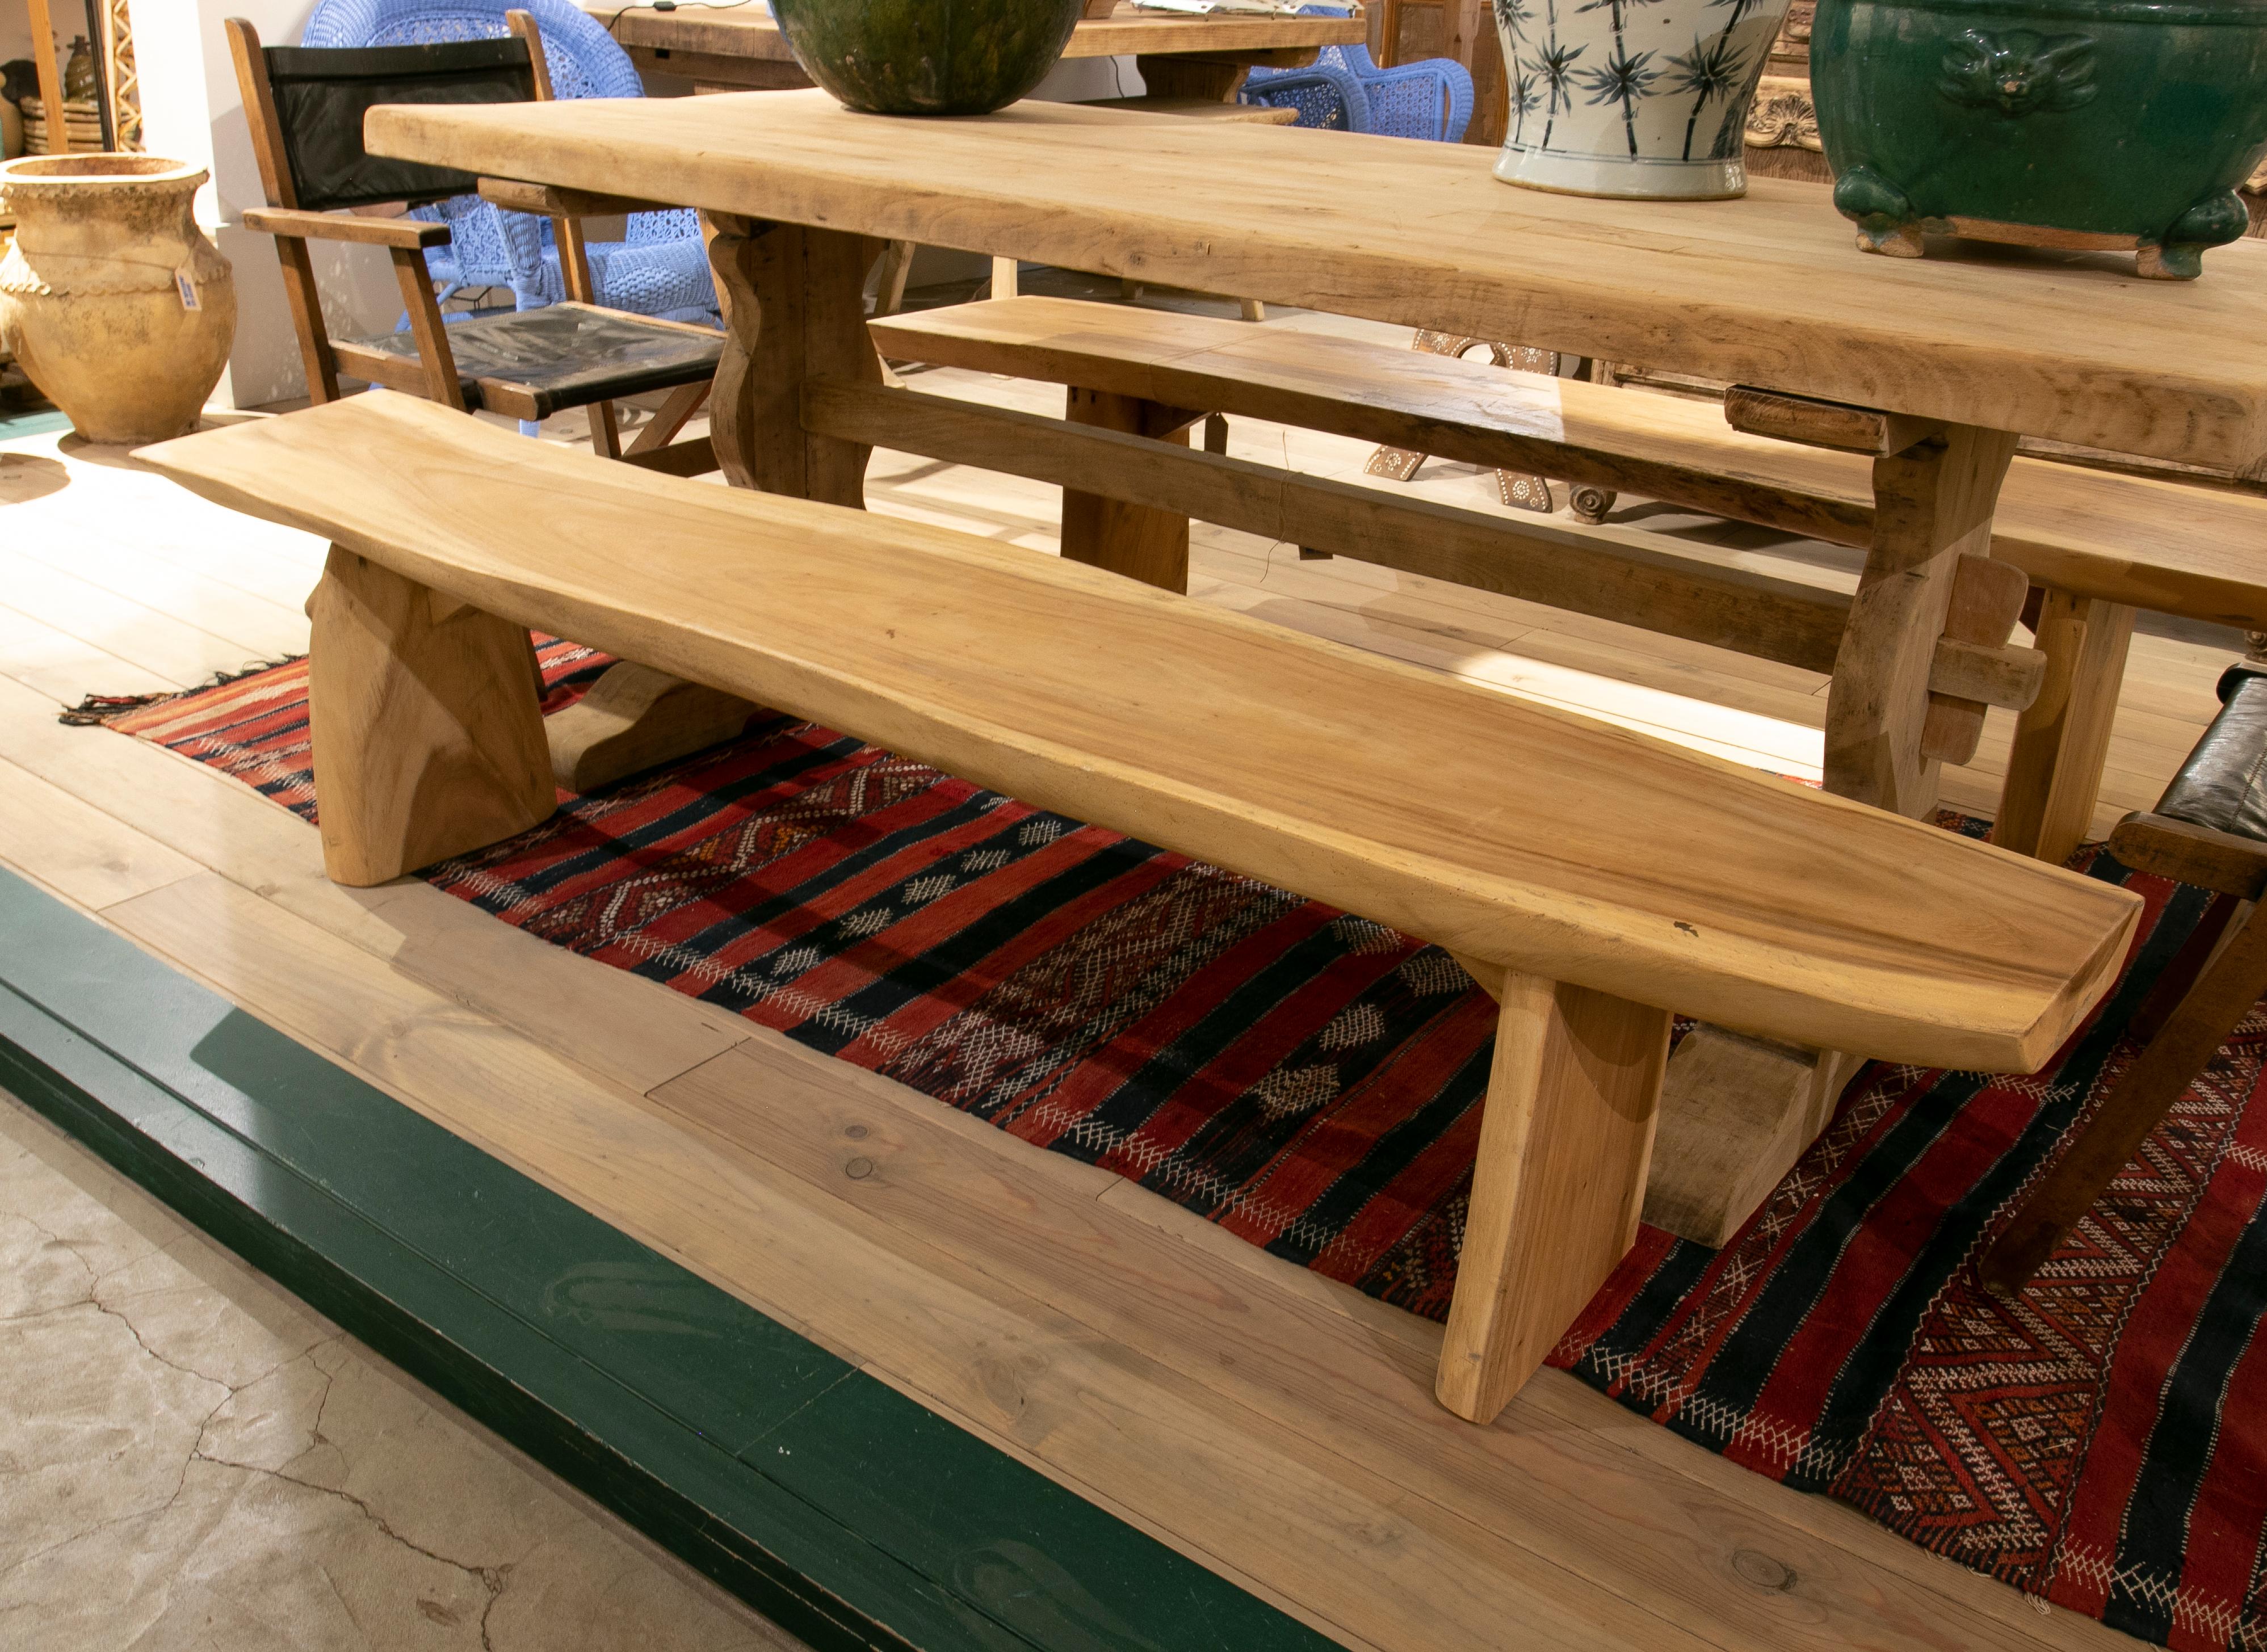 Spanish Pair of Wooden Benches in Their Natural Colour